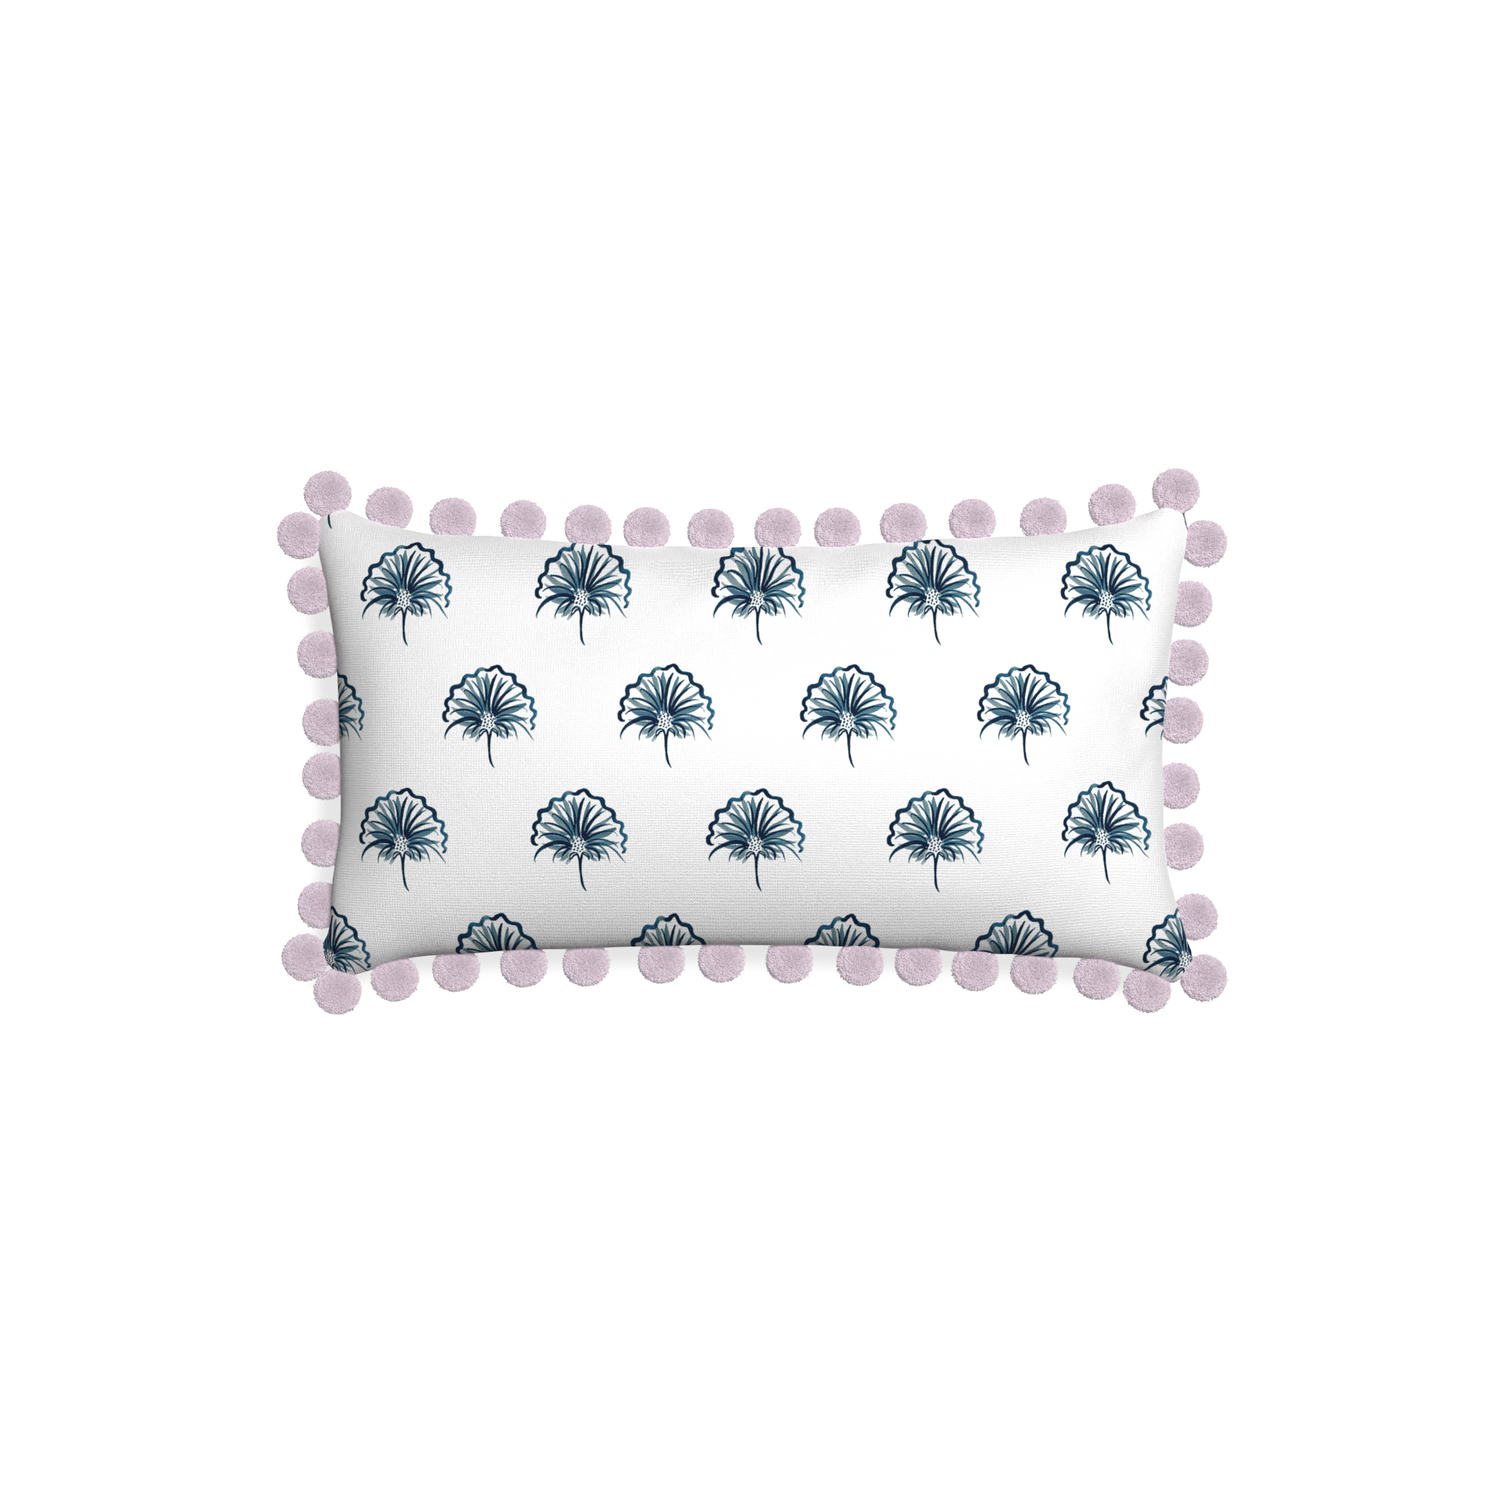 Petite-lumbar penelope midnight custom floral navypillow with l on white background